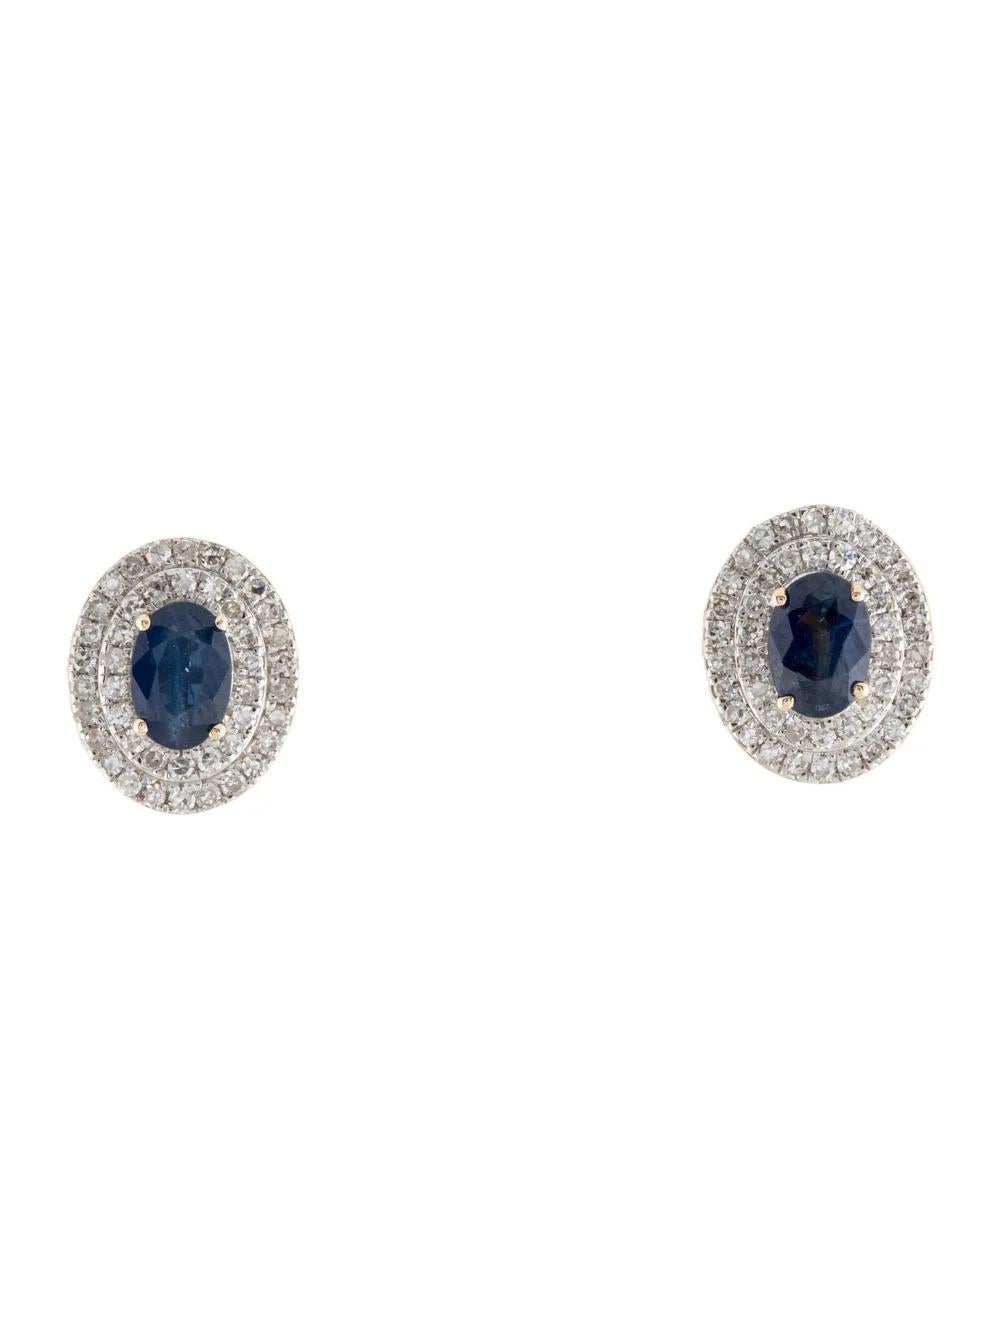 Discover timeless elegance with these captivating Rhodium-Plated & 14K Yellow Gold stud earrings, adorned with Oval Modified Brilliant Sapphires and sparkling diamonds.

SPECIFICATIONS:

* Metal Type: 14K Yellow Gold, Rhodium-Plated
* Total Item